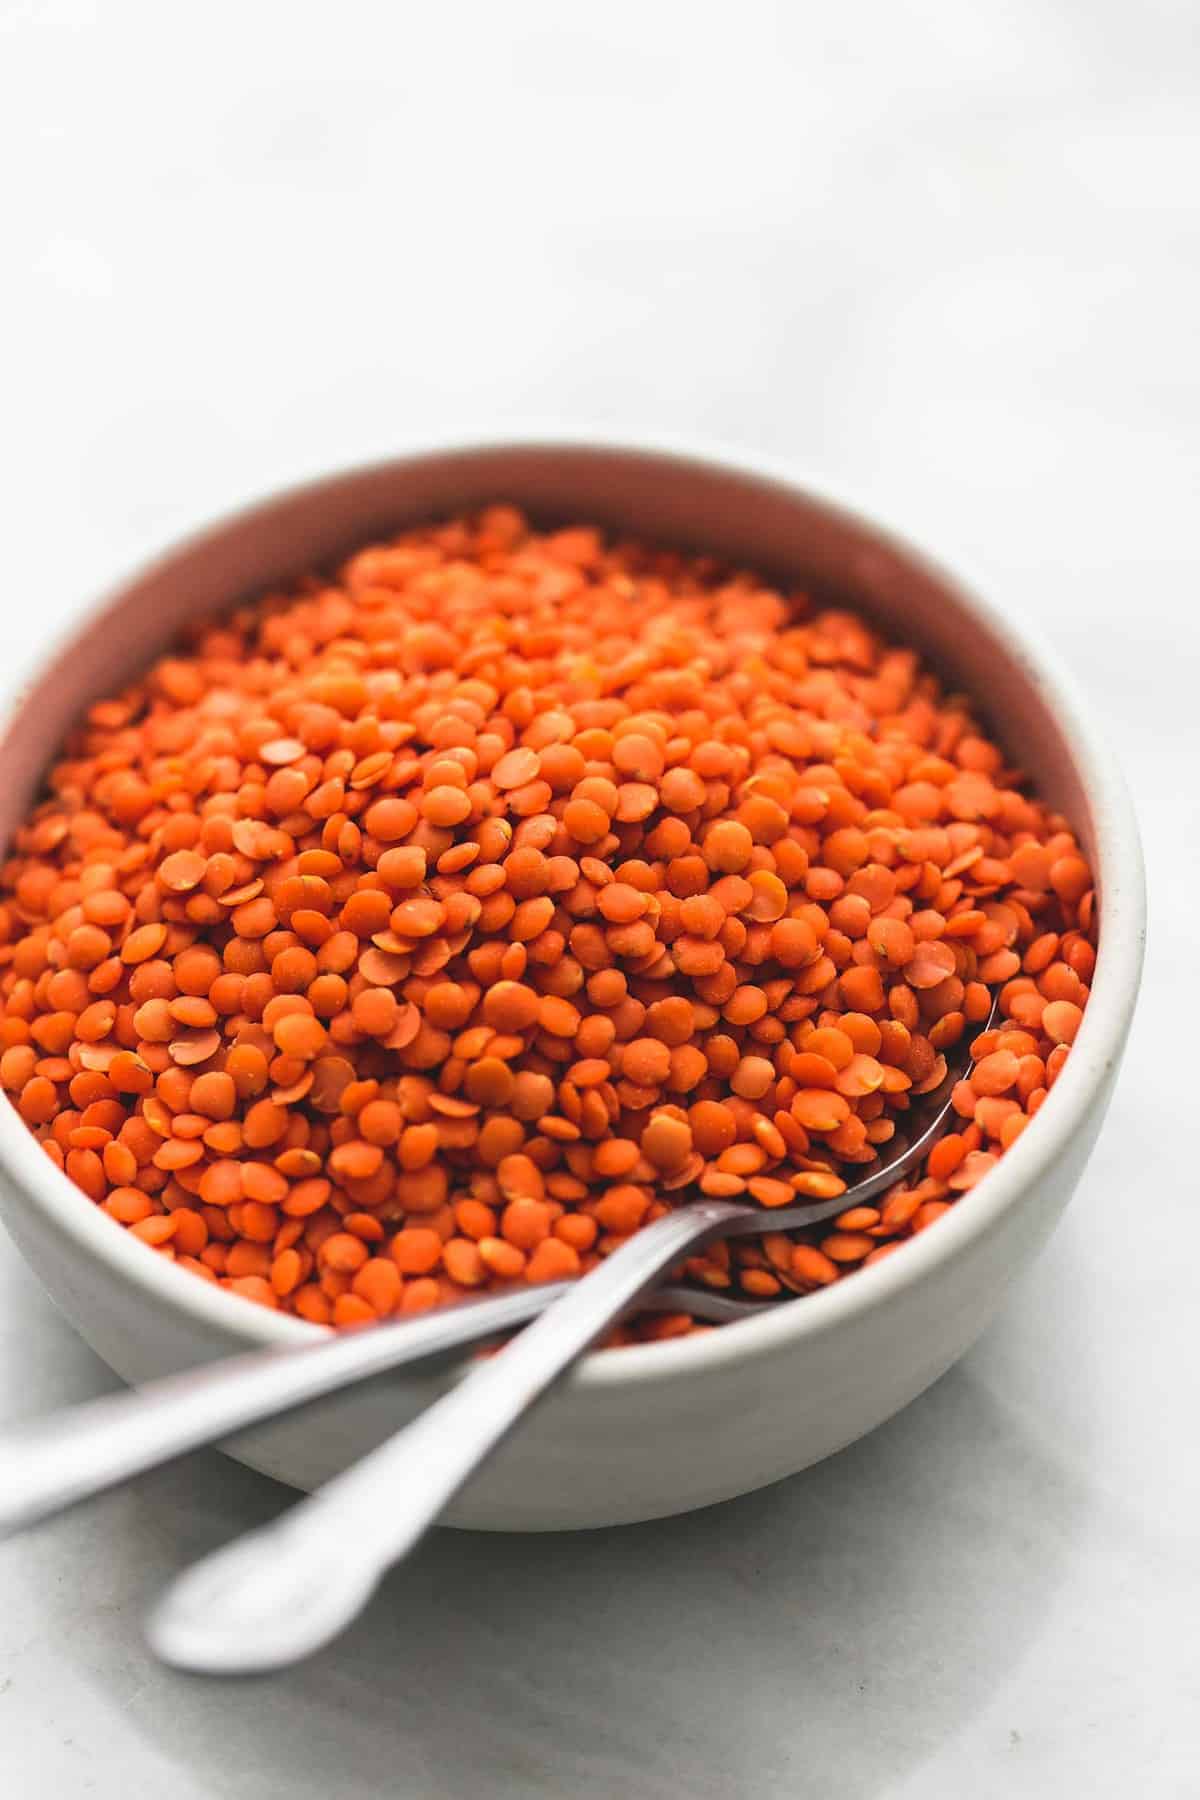 lentils and spoons in a bowl.